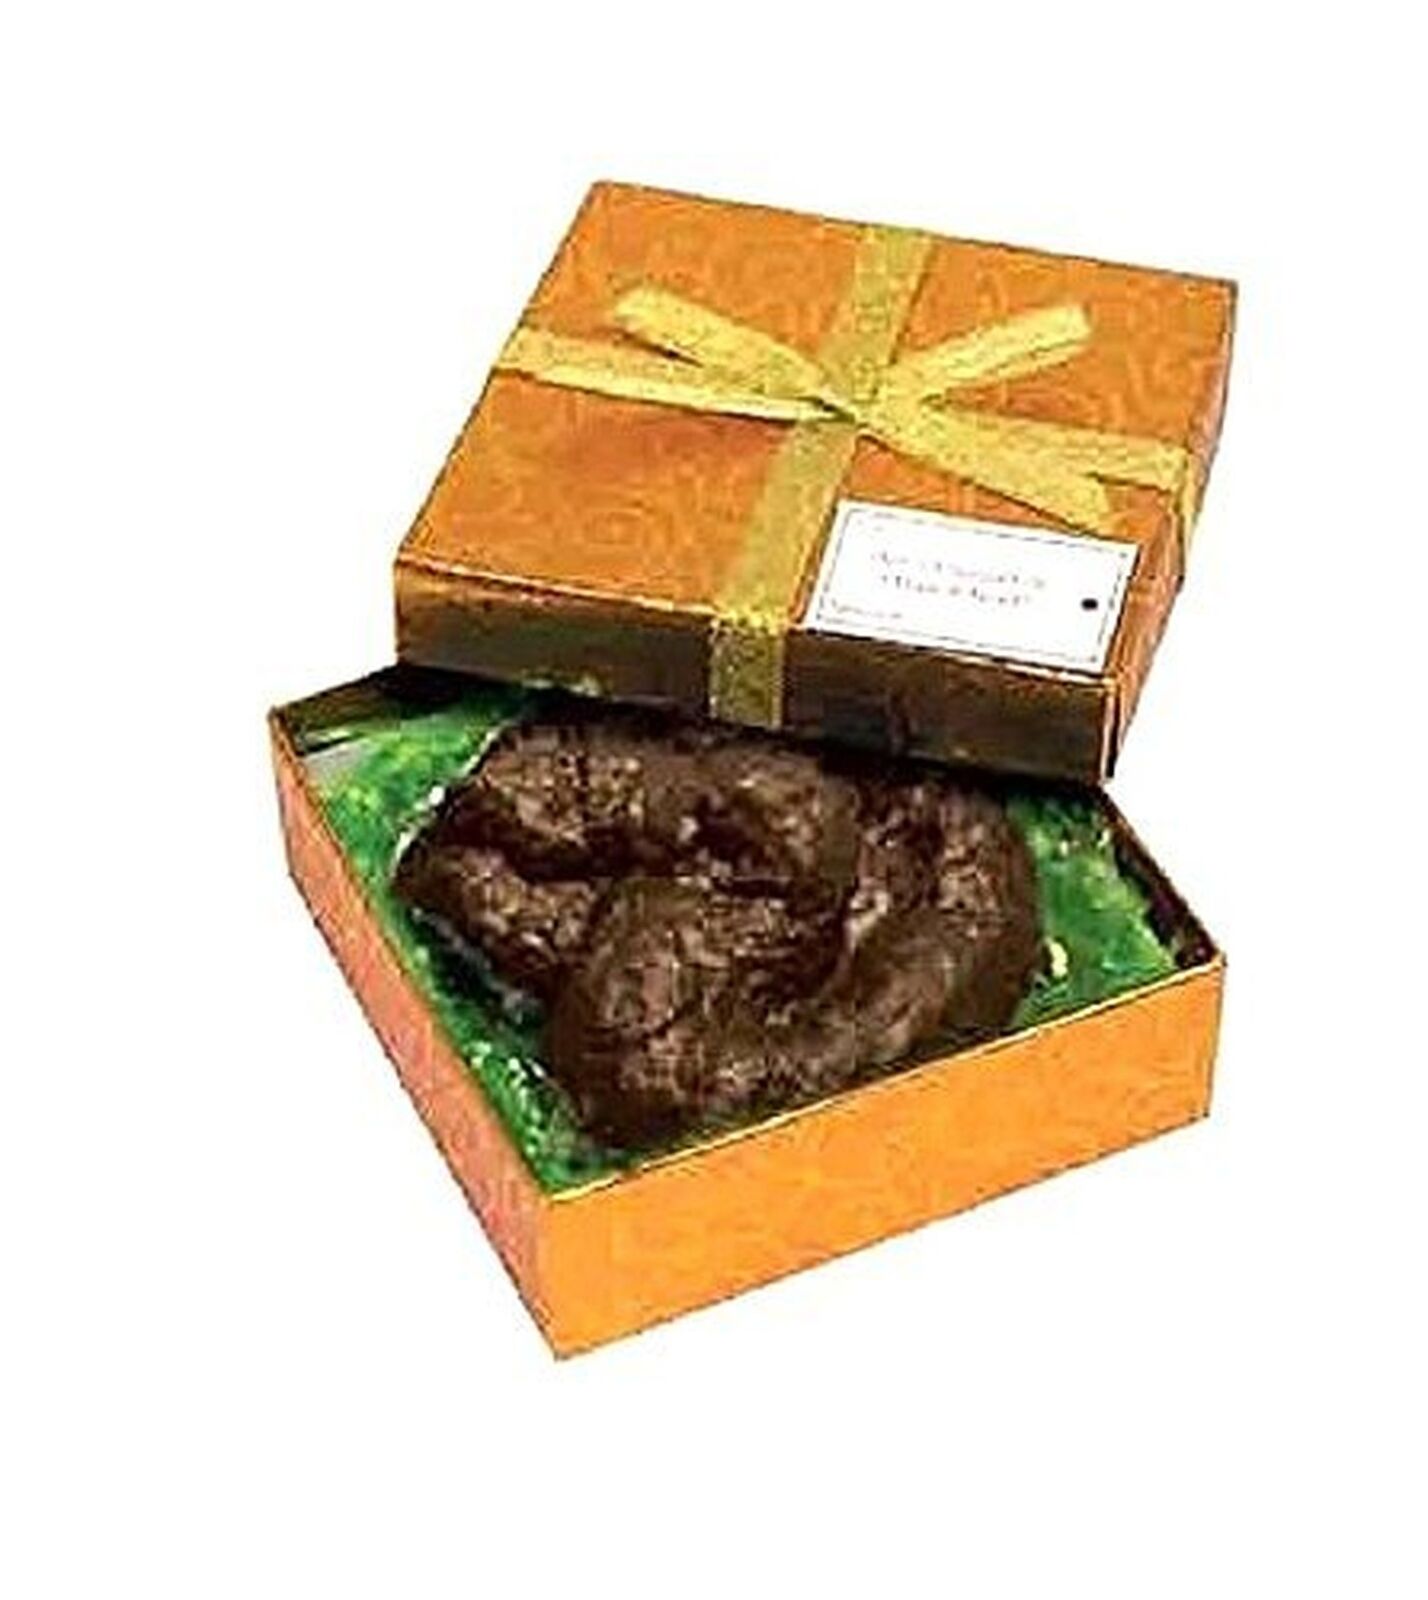 Fake Poop in a Gift Box